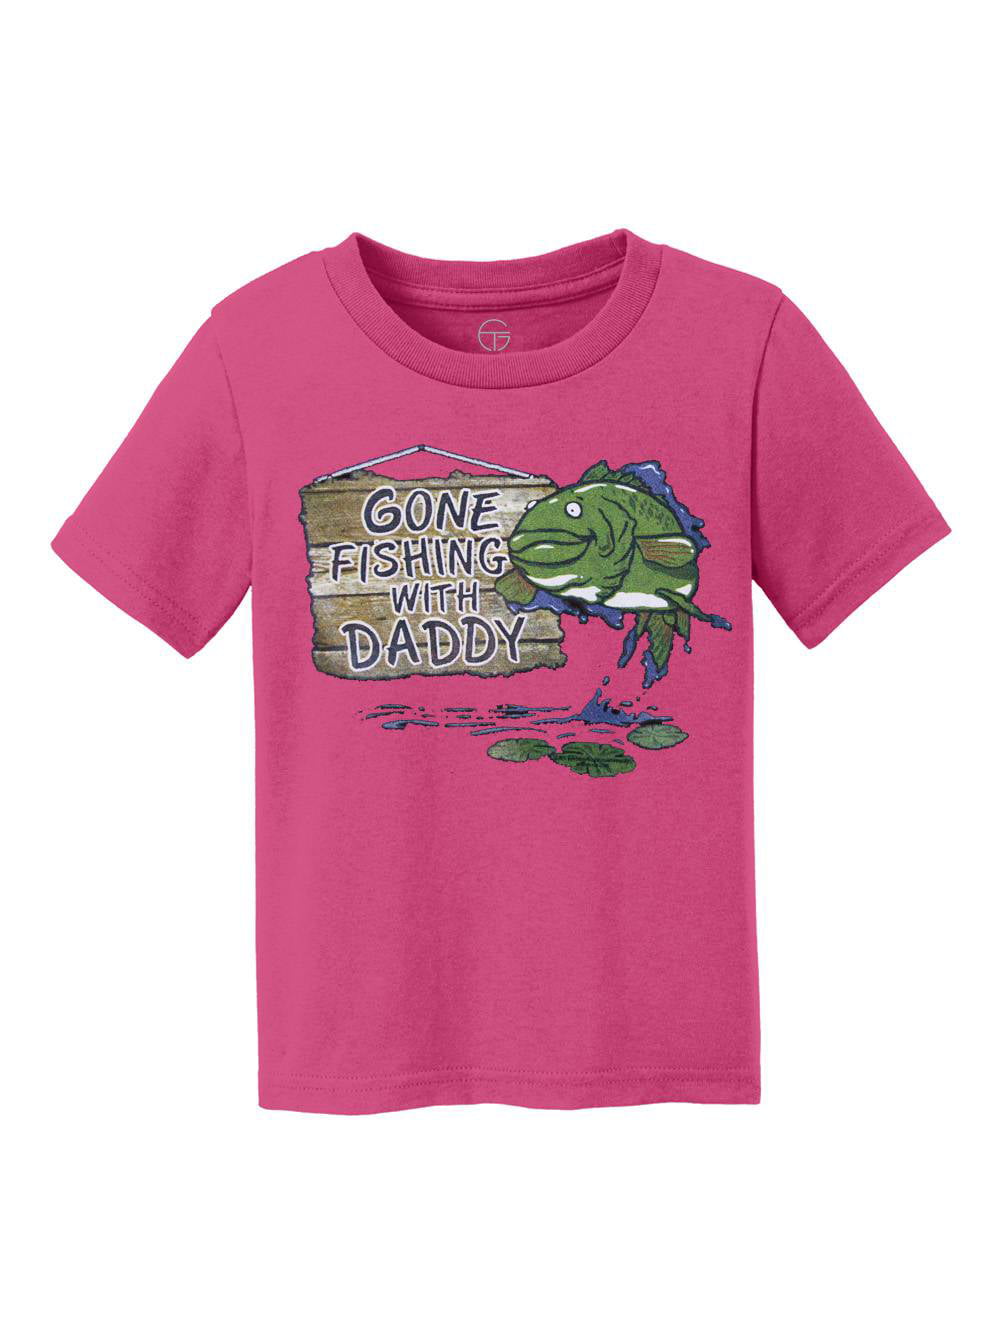 Gone Fishing With Daddy Kids Cotton T-Shirt - Jet Black - X-Large 